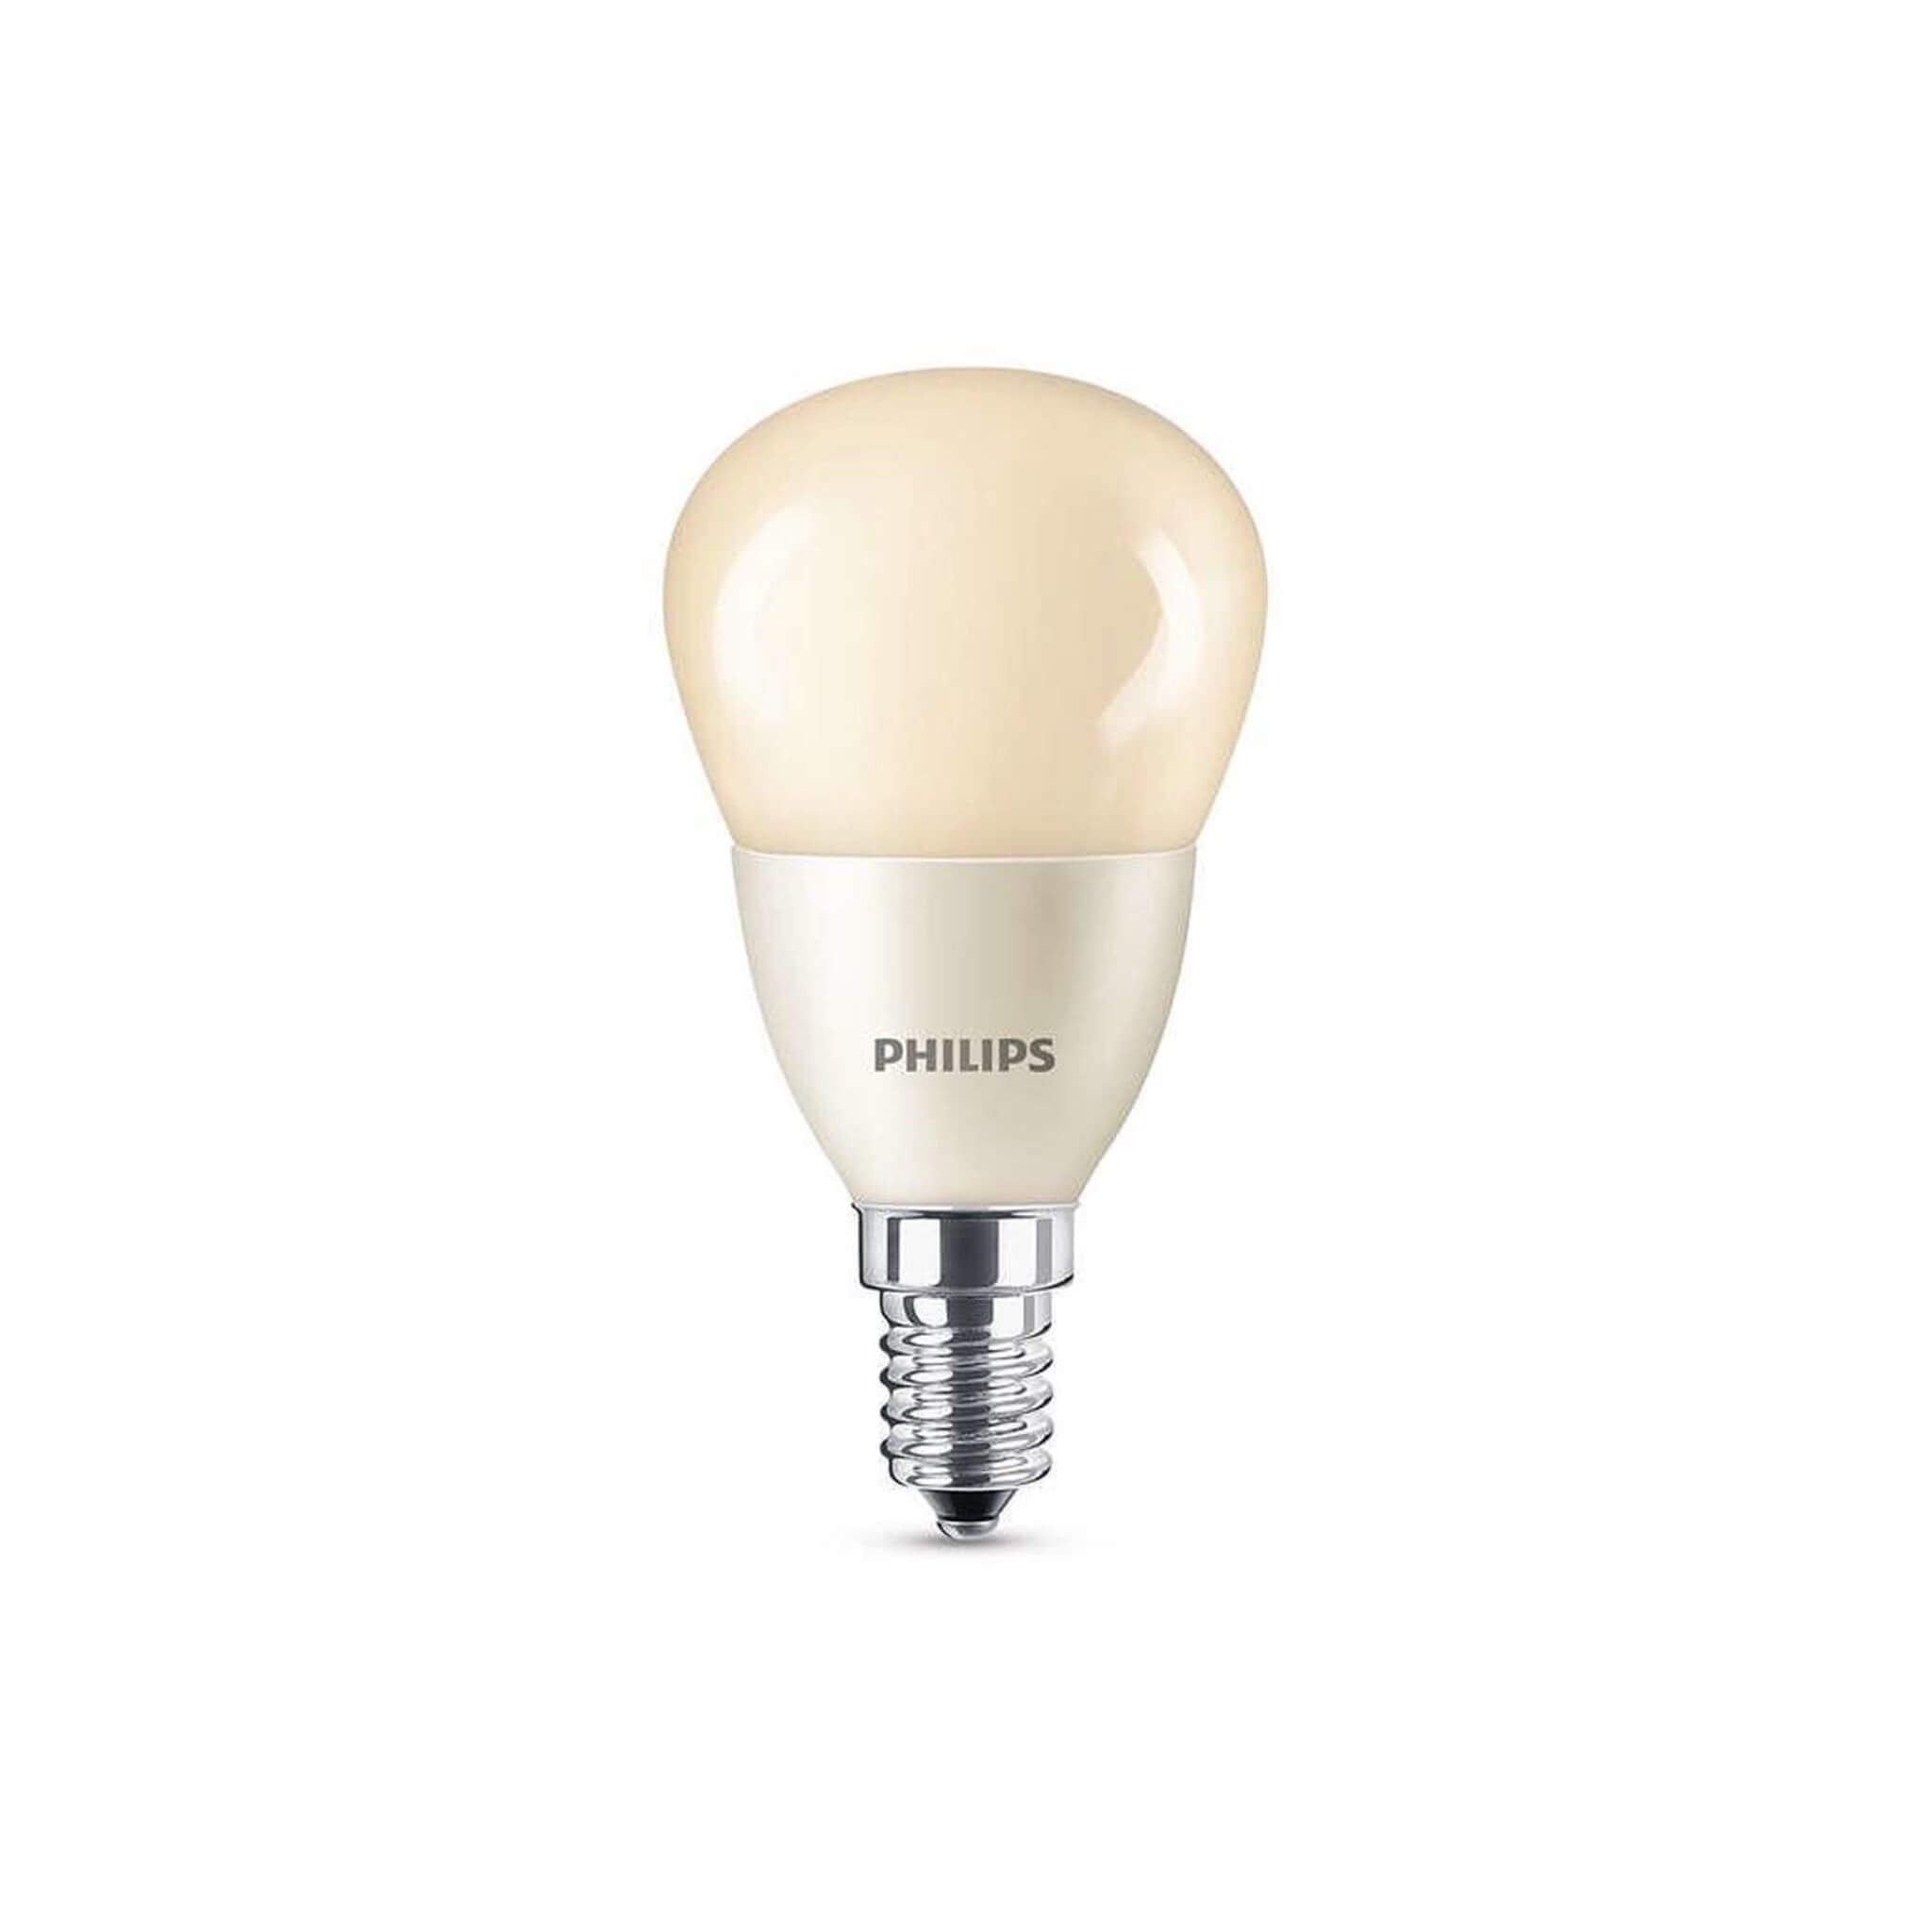 regeling woede Beweging Philips LED Lamp Flame - E14 fitting - Dimbaar warm wit licht - 4W (15 – LED .nl